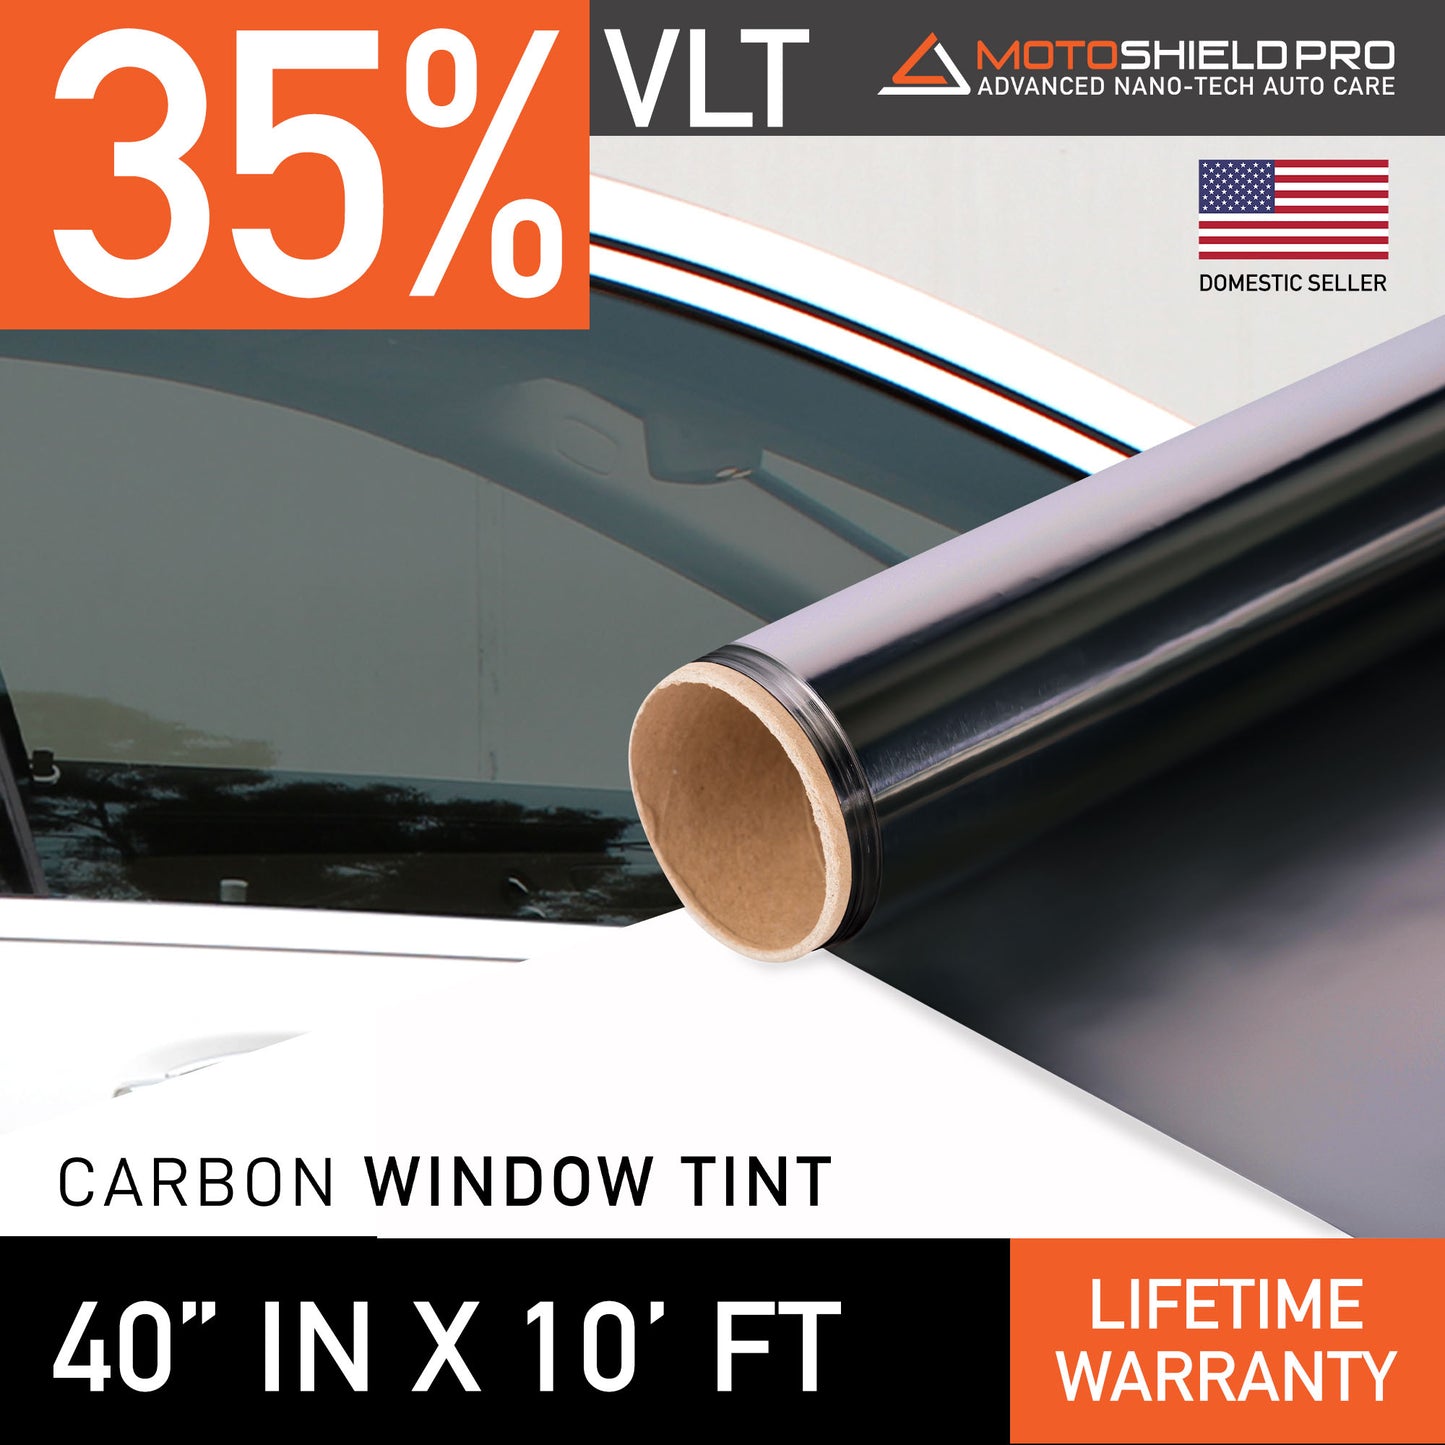 35 window tint vs. 40 - which should I get?